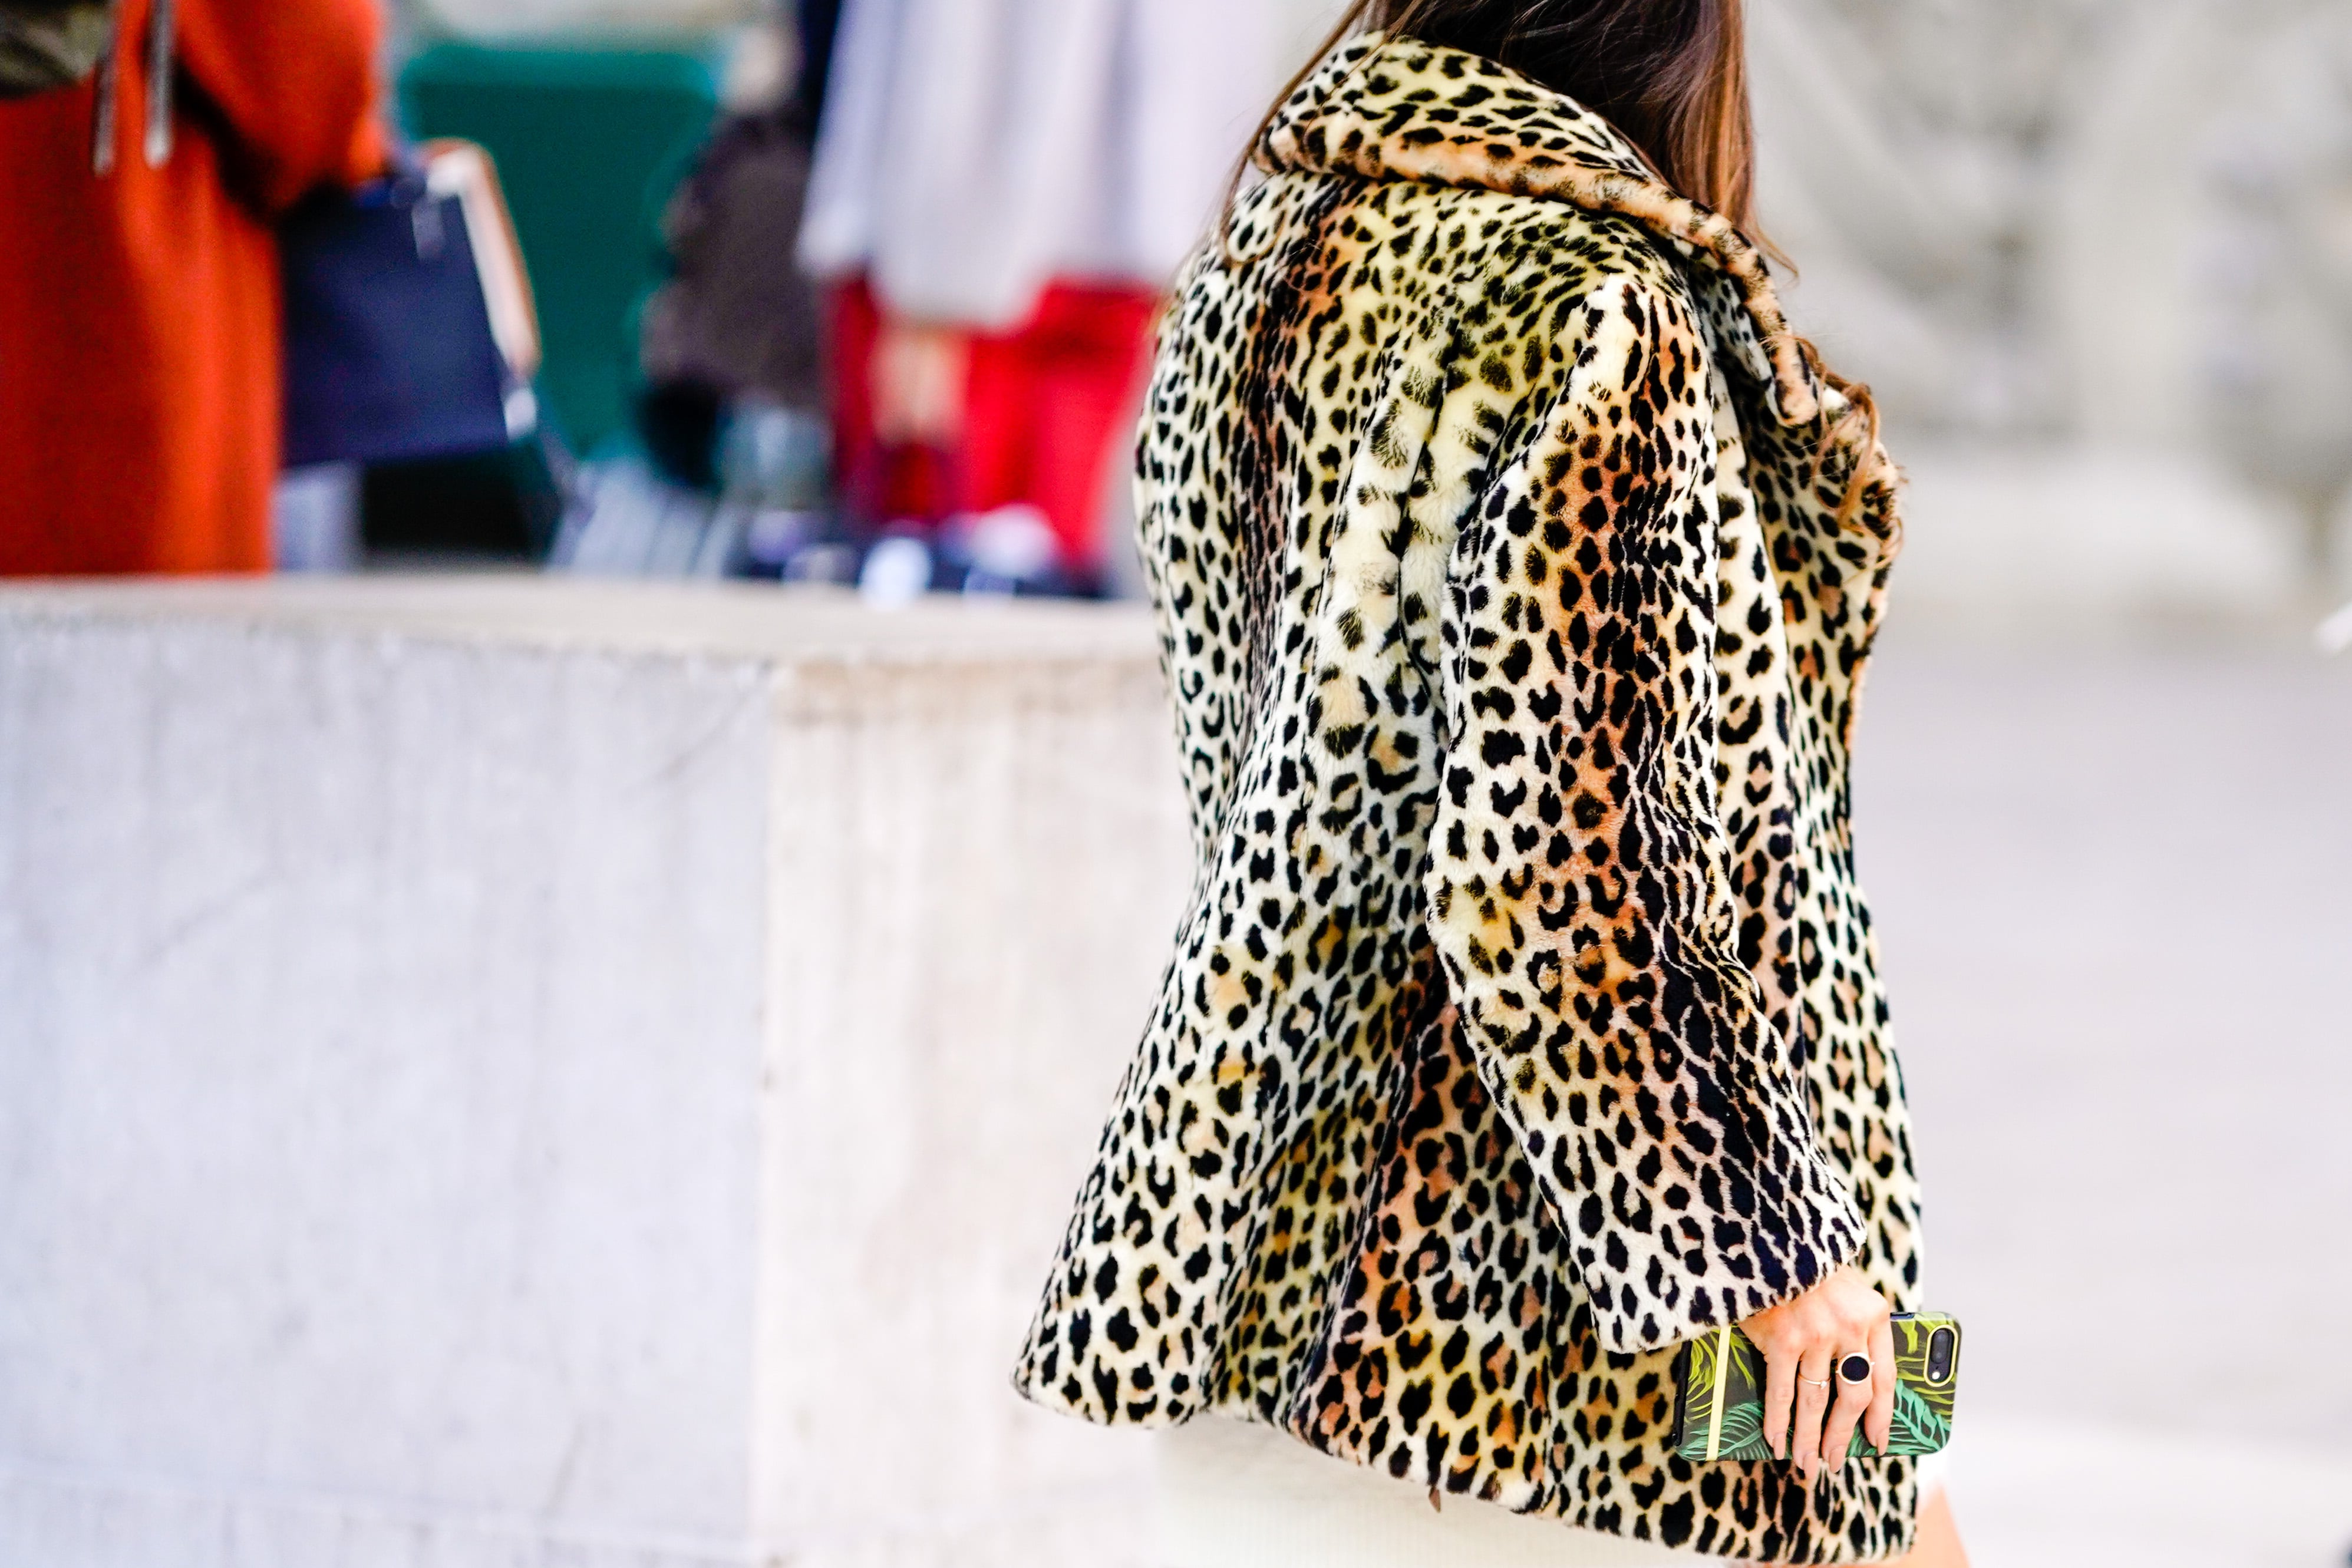 How to Wear a Leopard Coat and Cute Cheap Options to Shop | POPSUGAR ...